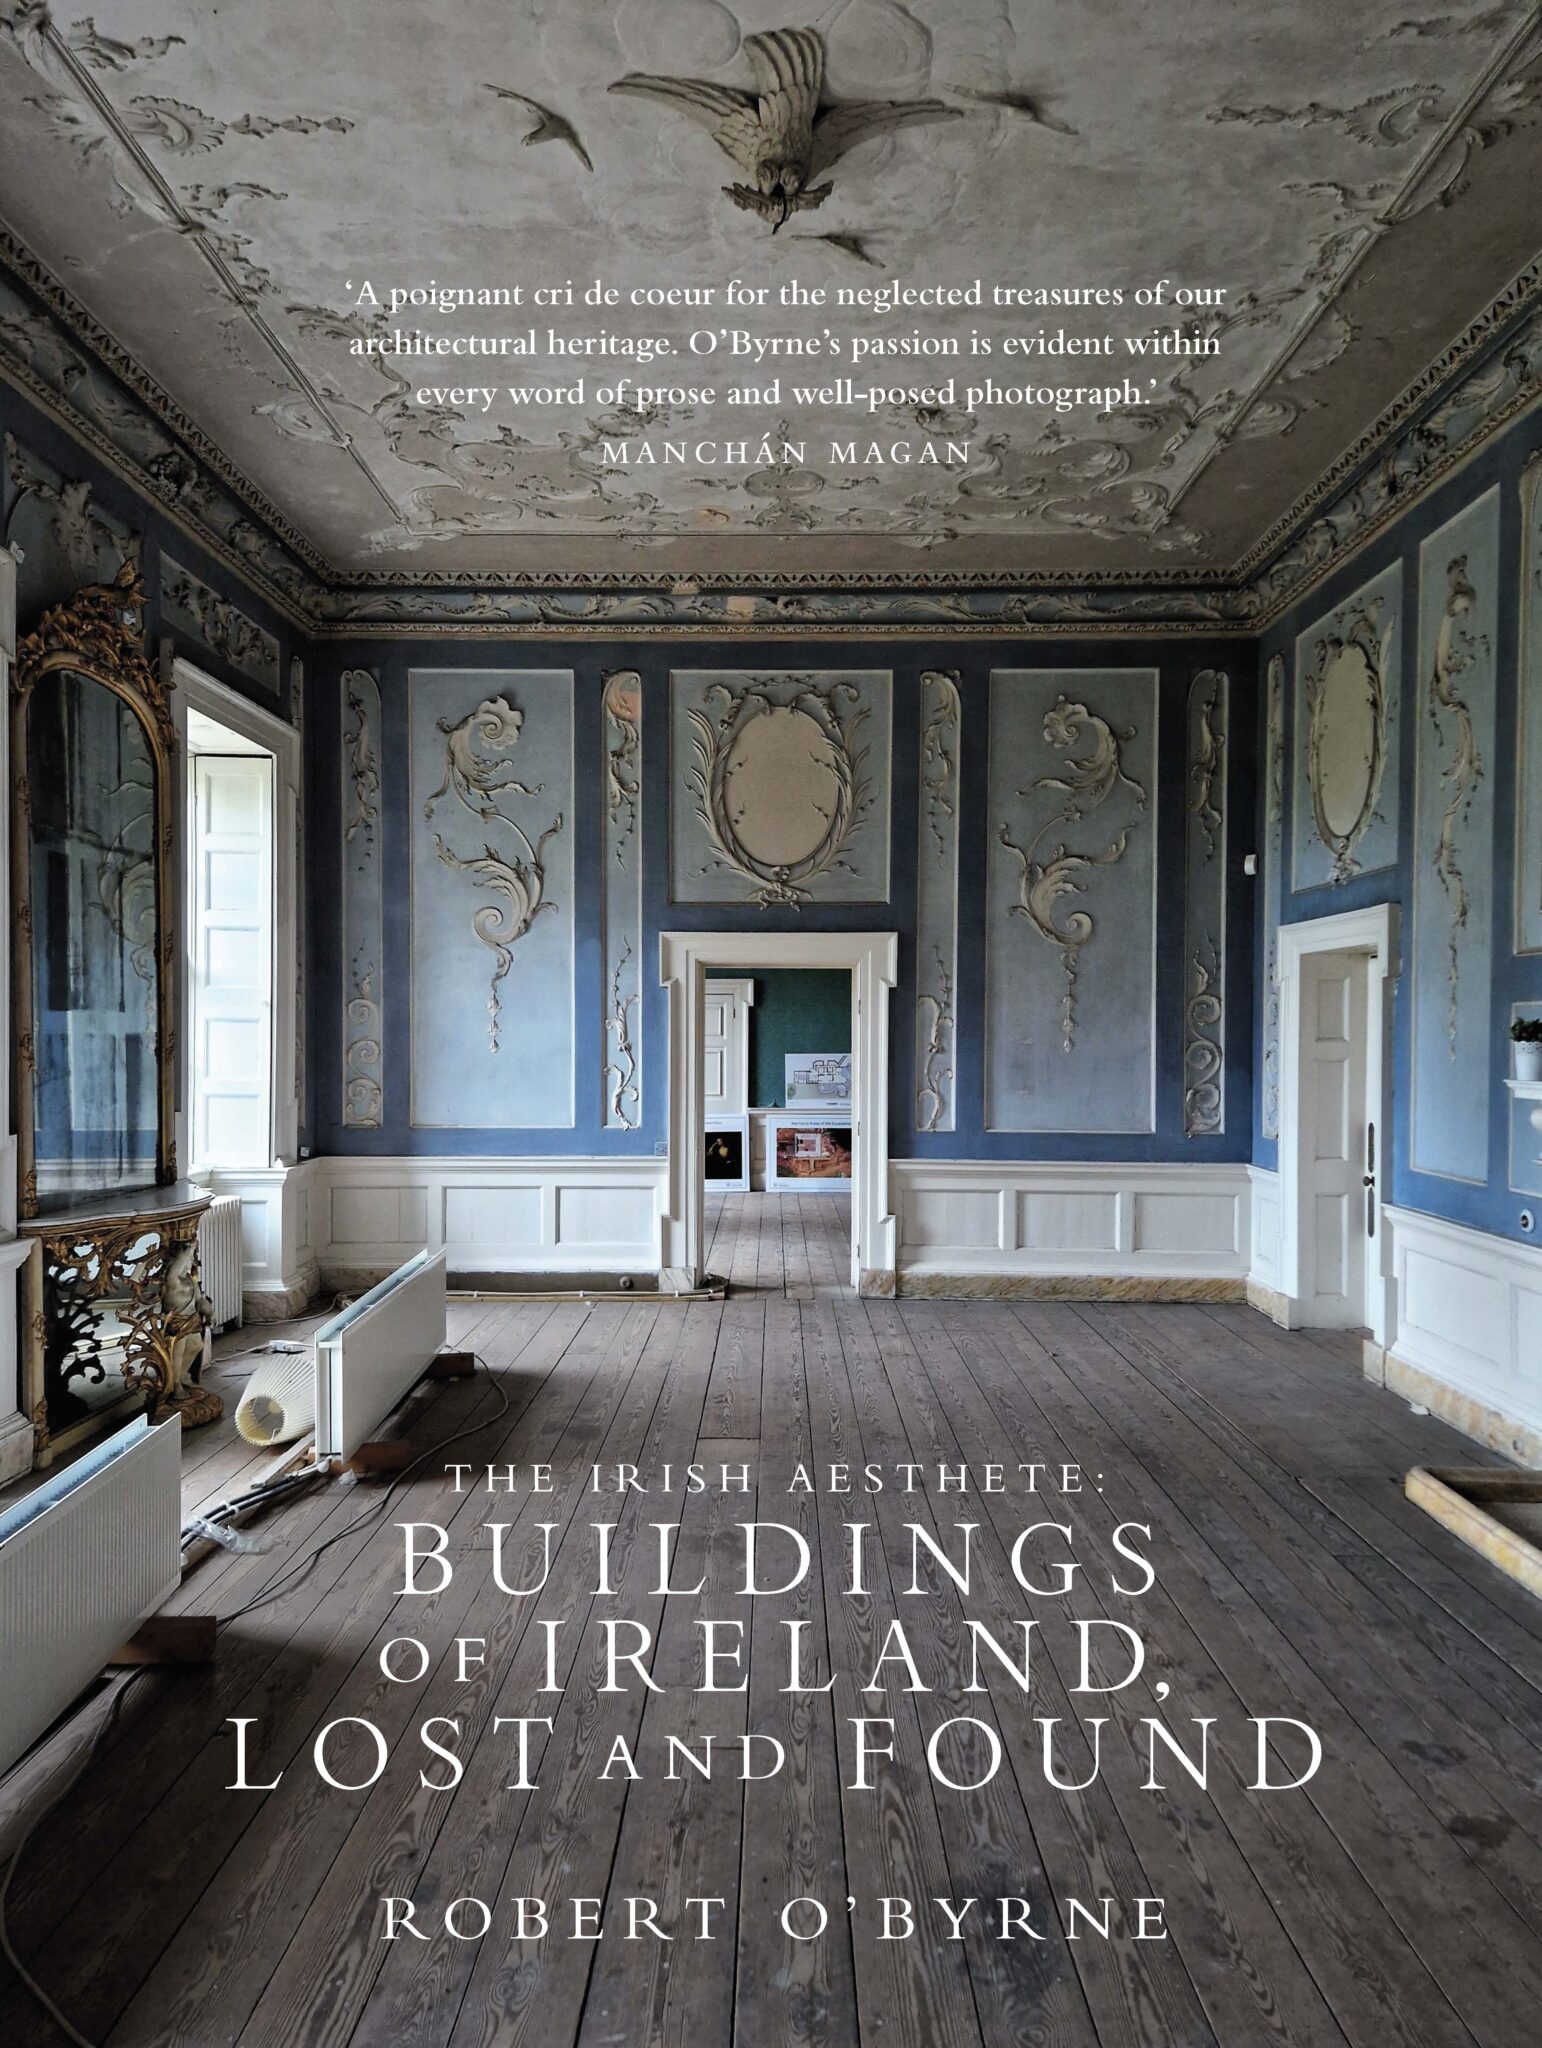 The Irish Aesthete: Buildings of Ireland, Lost and Found | Robert O'Byrne | Charlie Byrne's